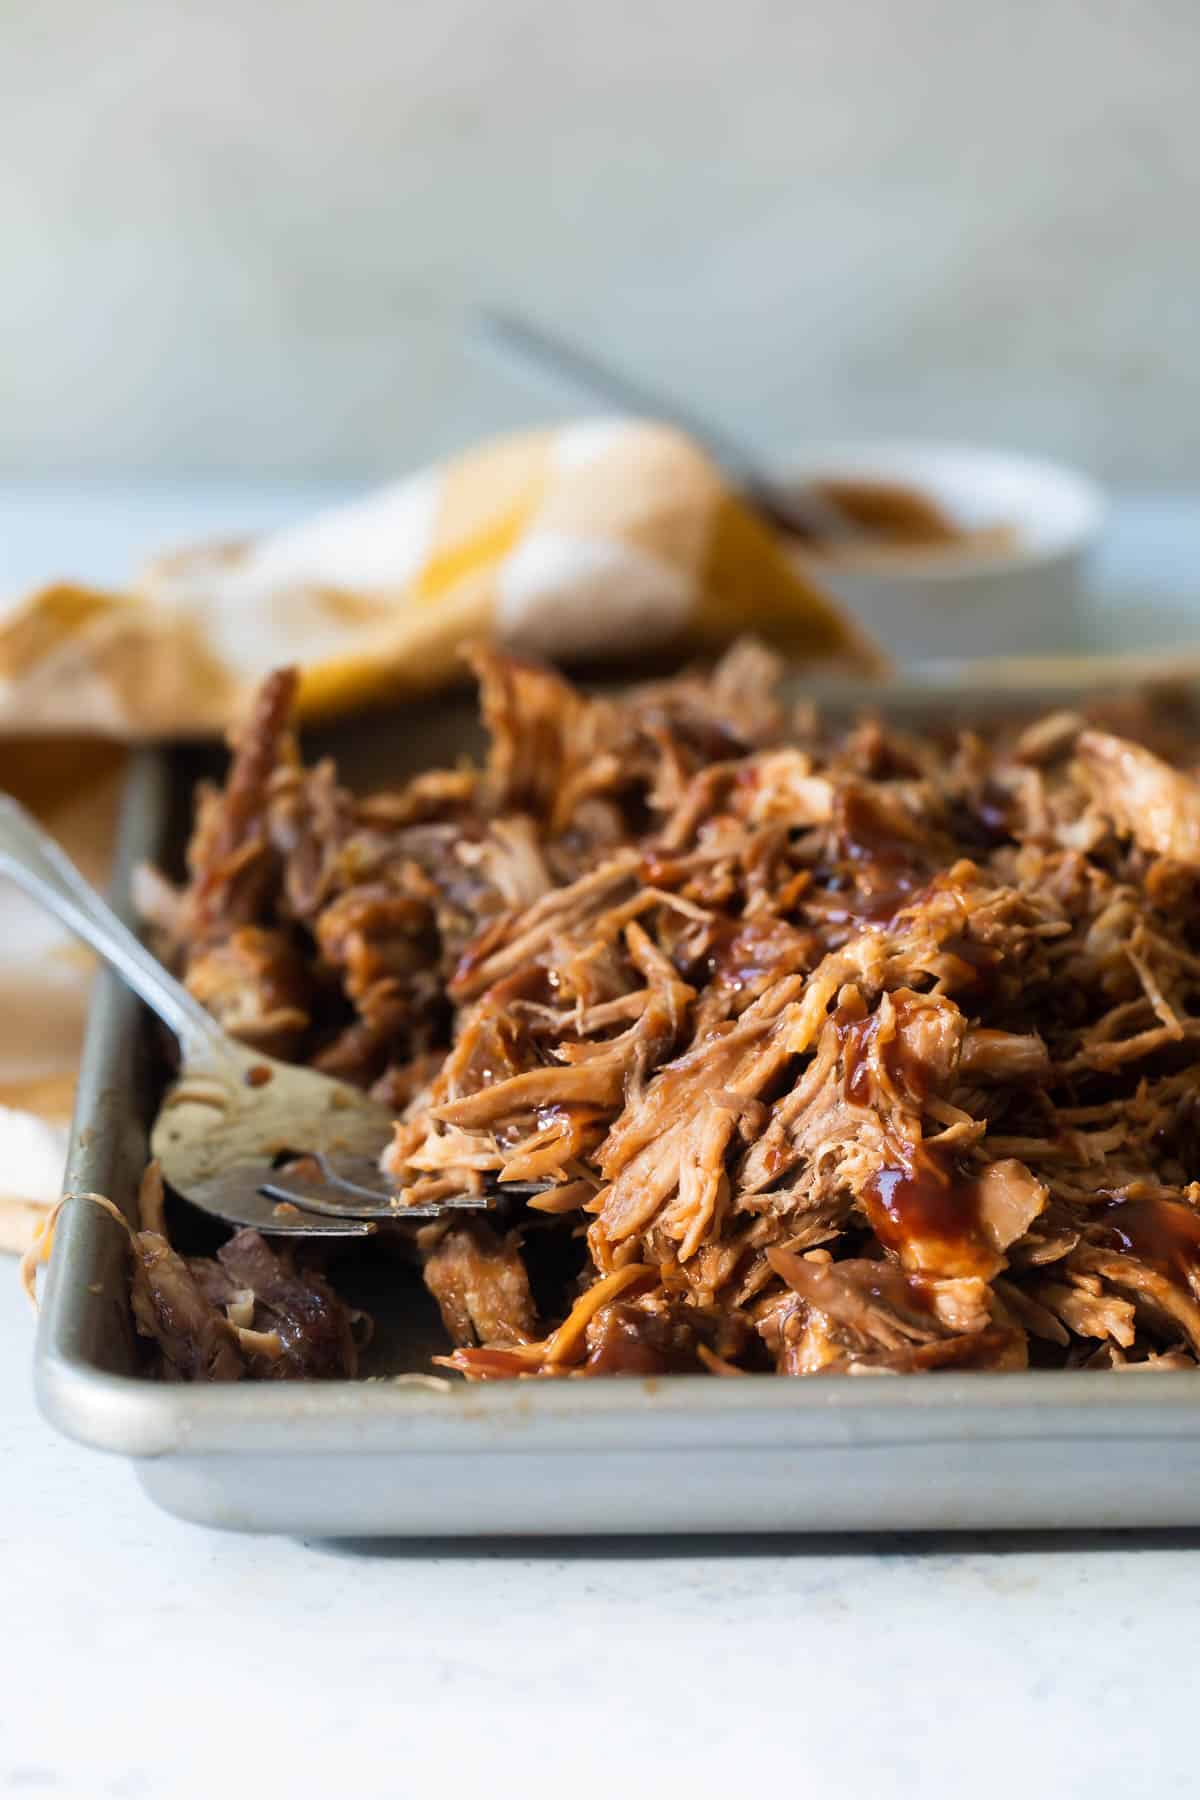 A sheet pan of cooked pulled pork.